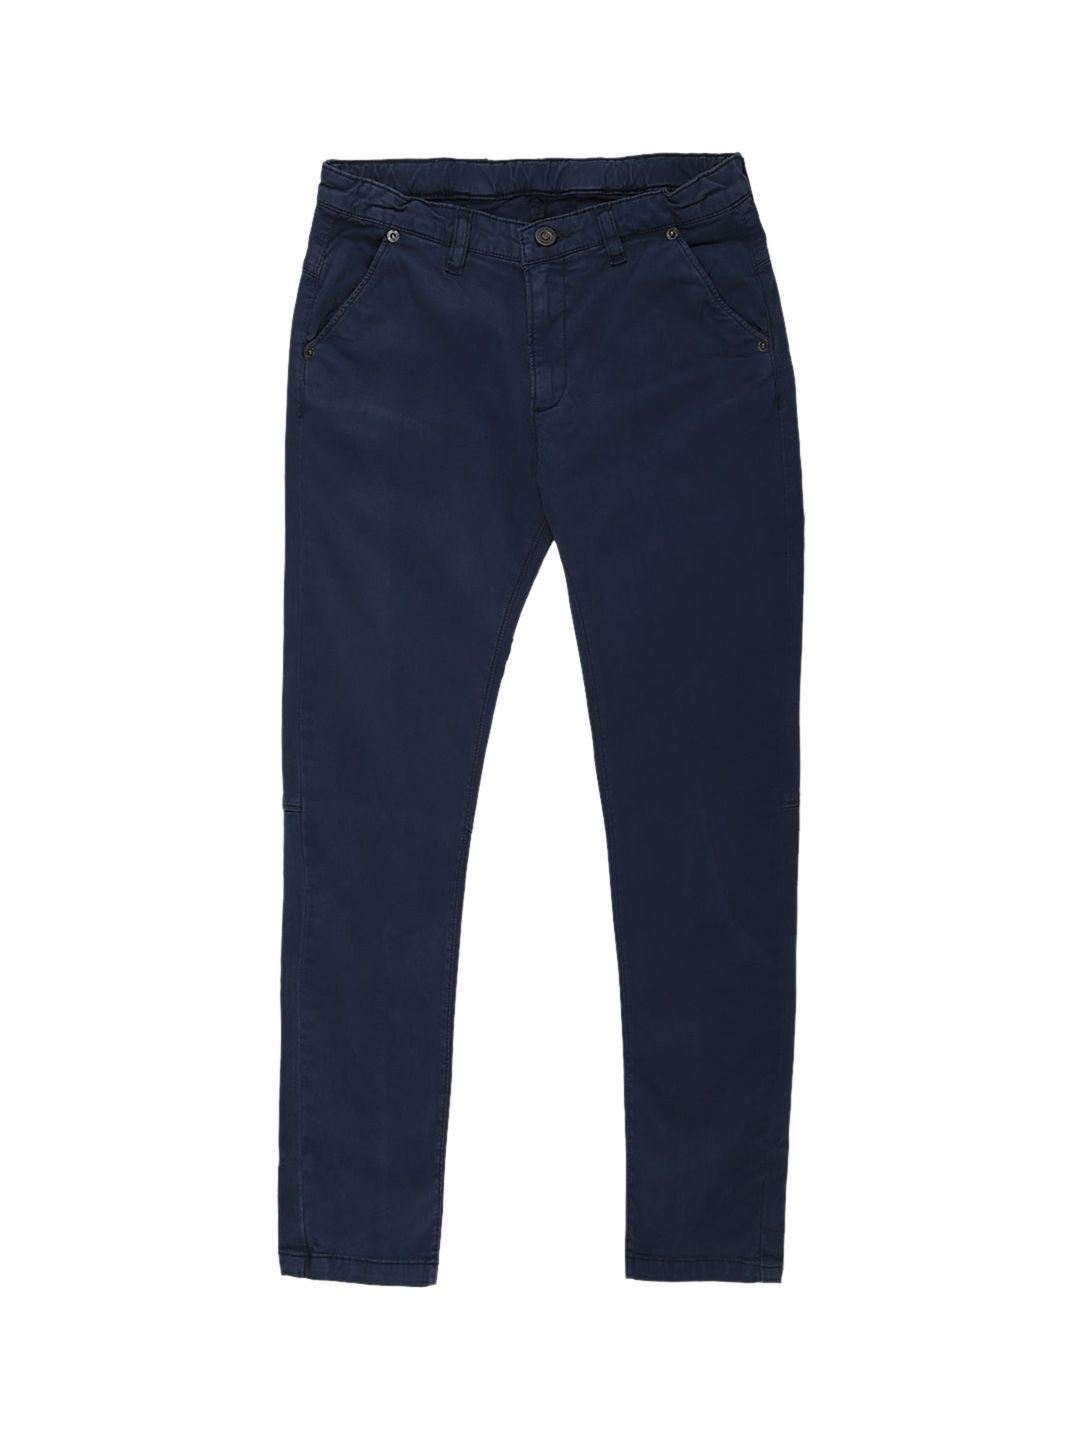 peter england boys skinny fit chinos trousers